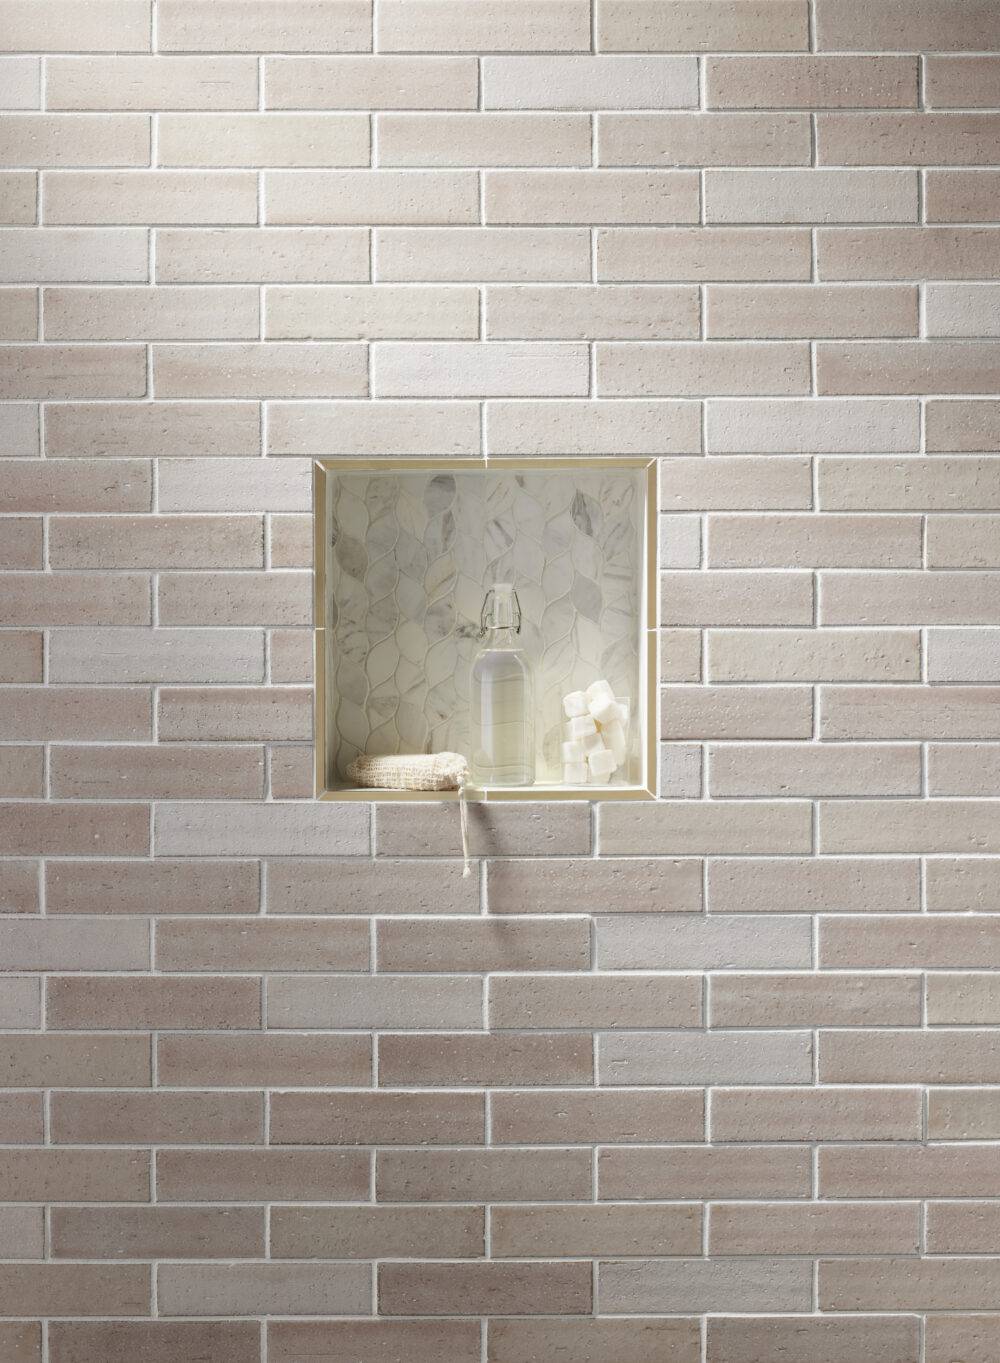 Blush-colored brick-look subway tile with marble leaf-shaped shower niche. 